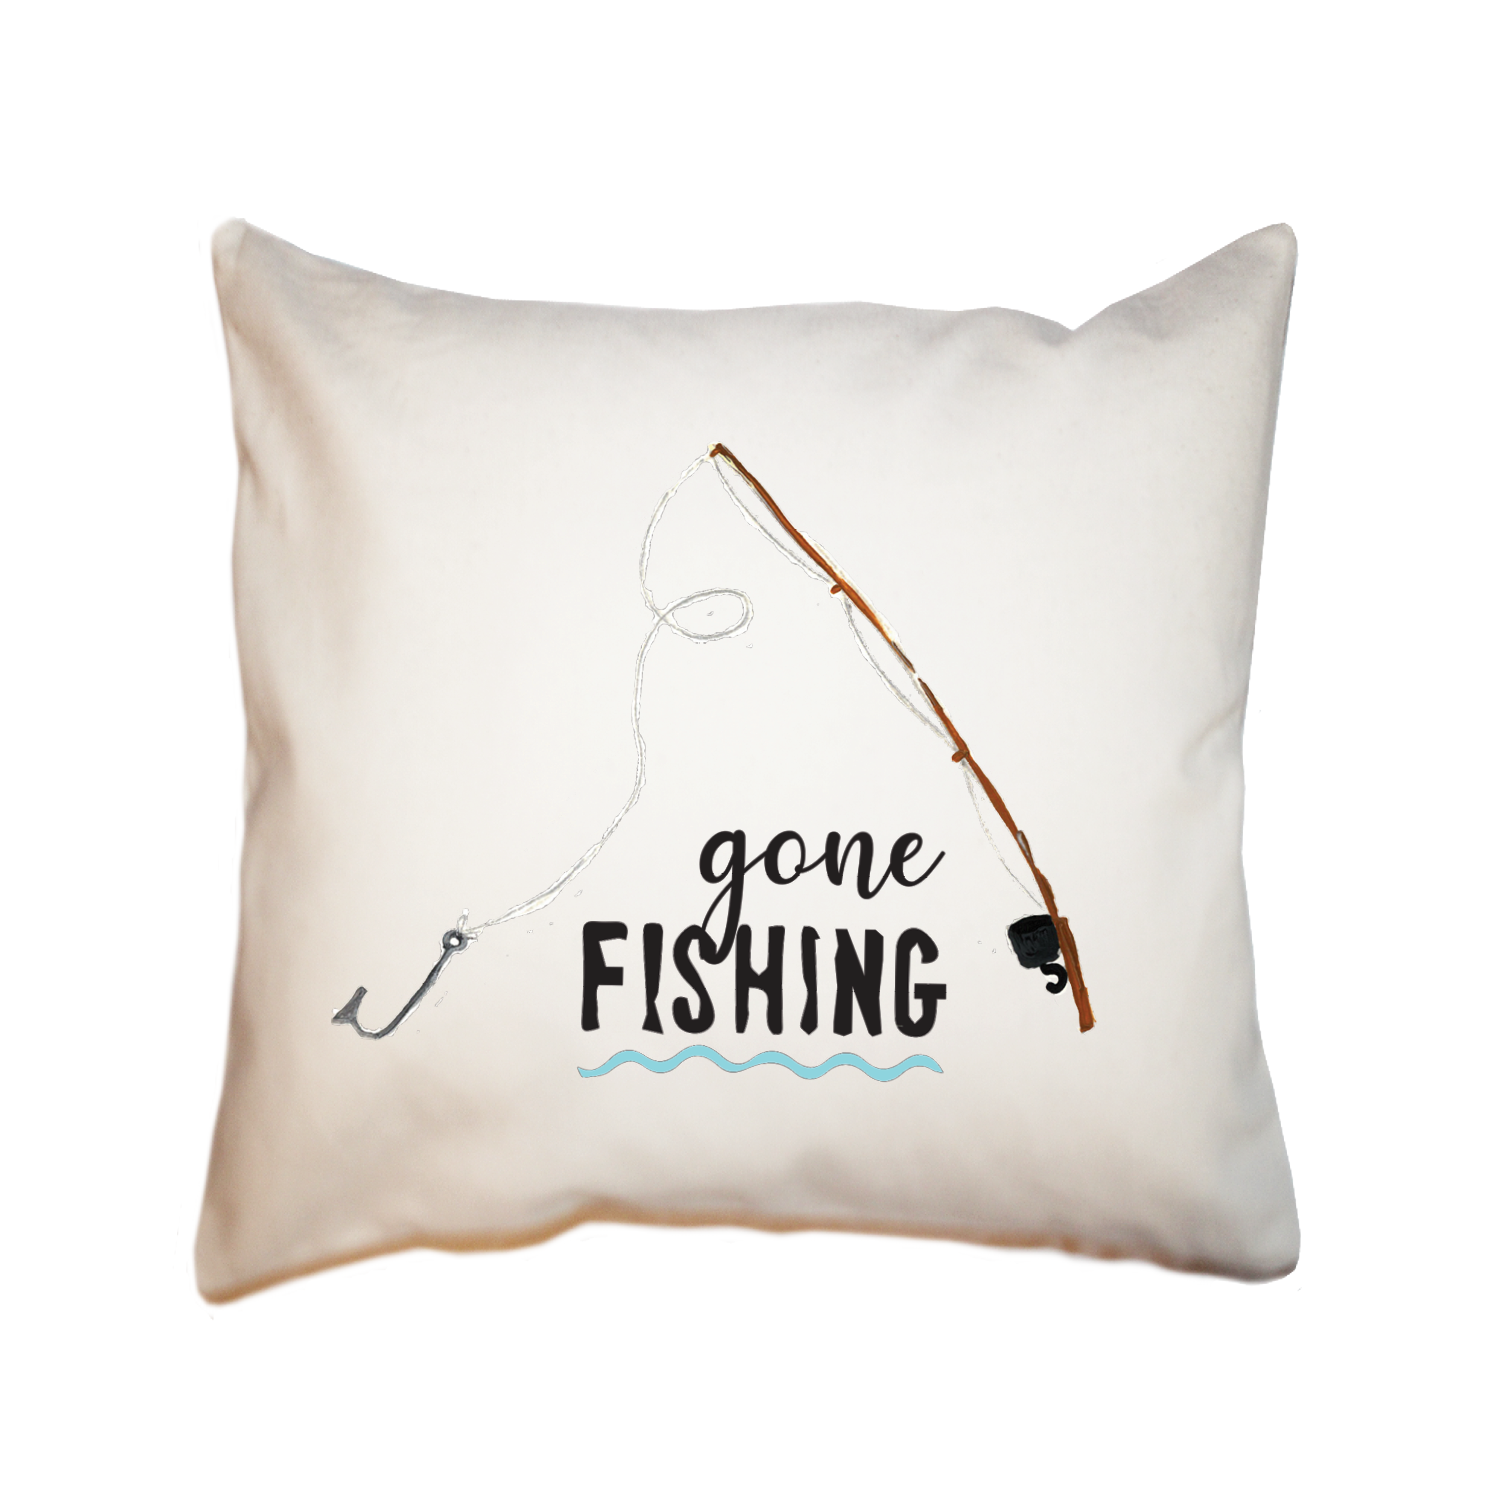 gone fishing square pillow